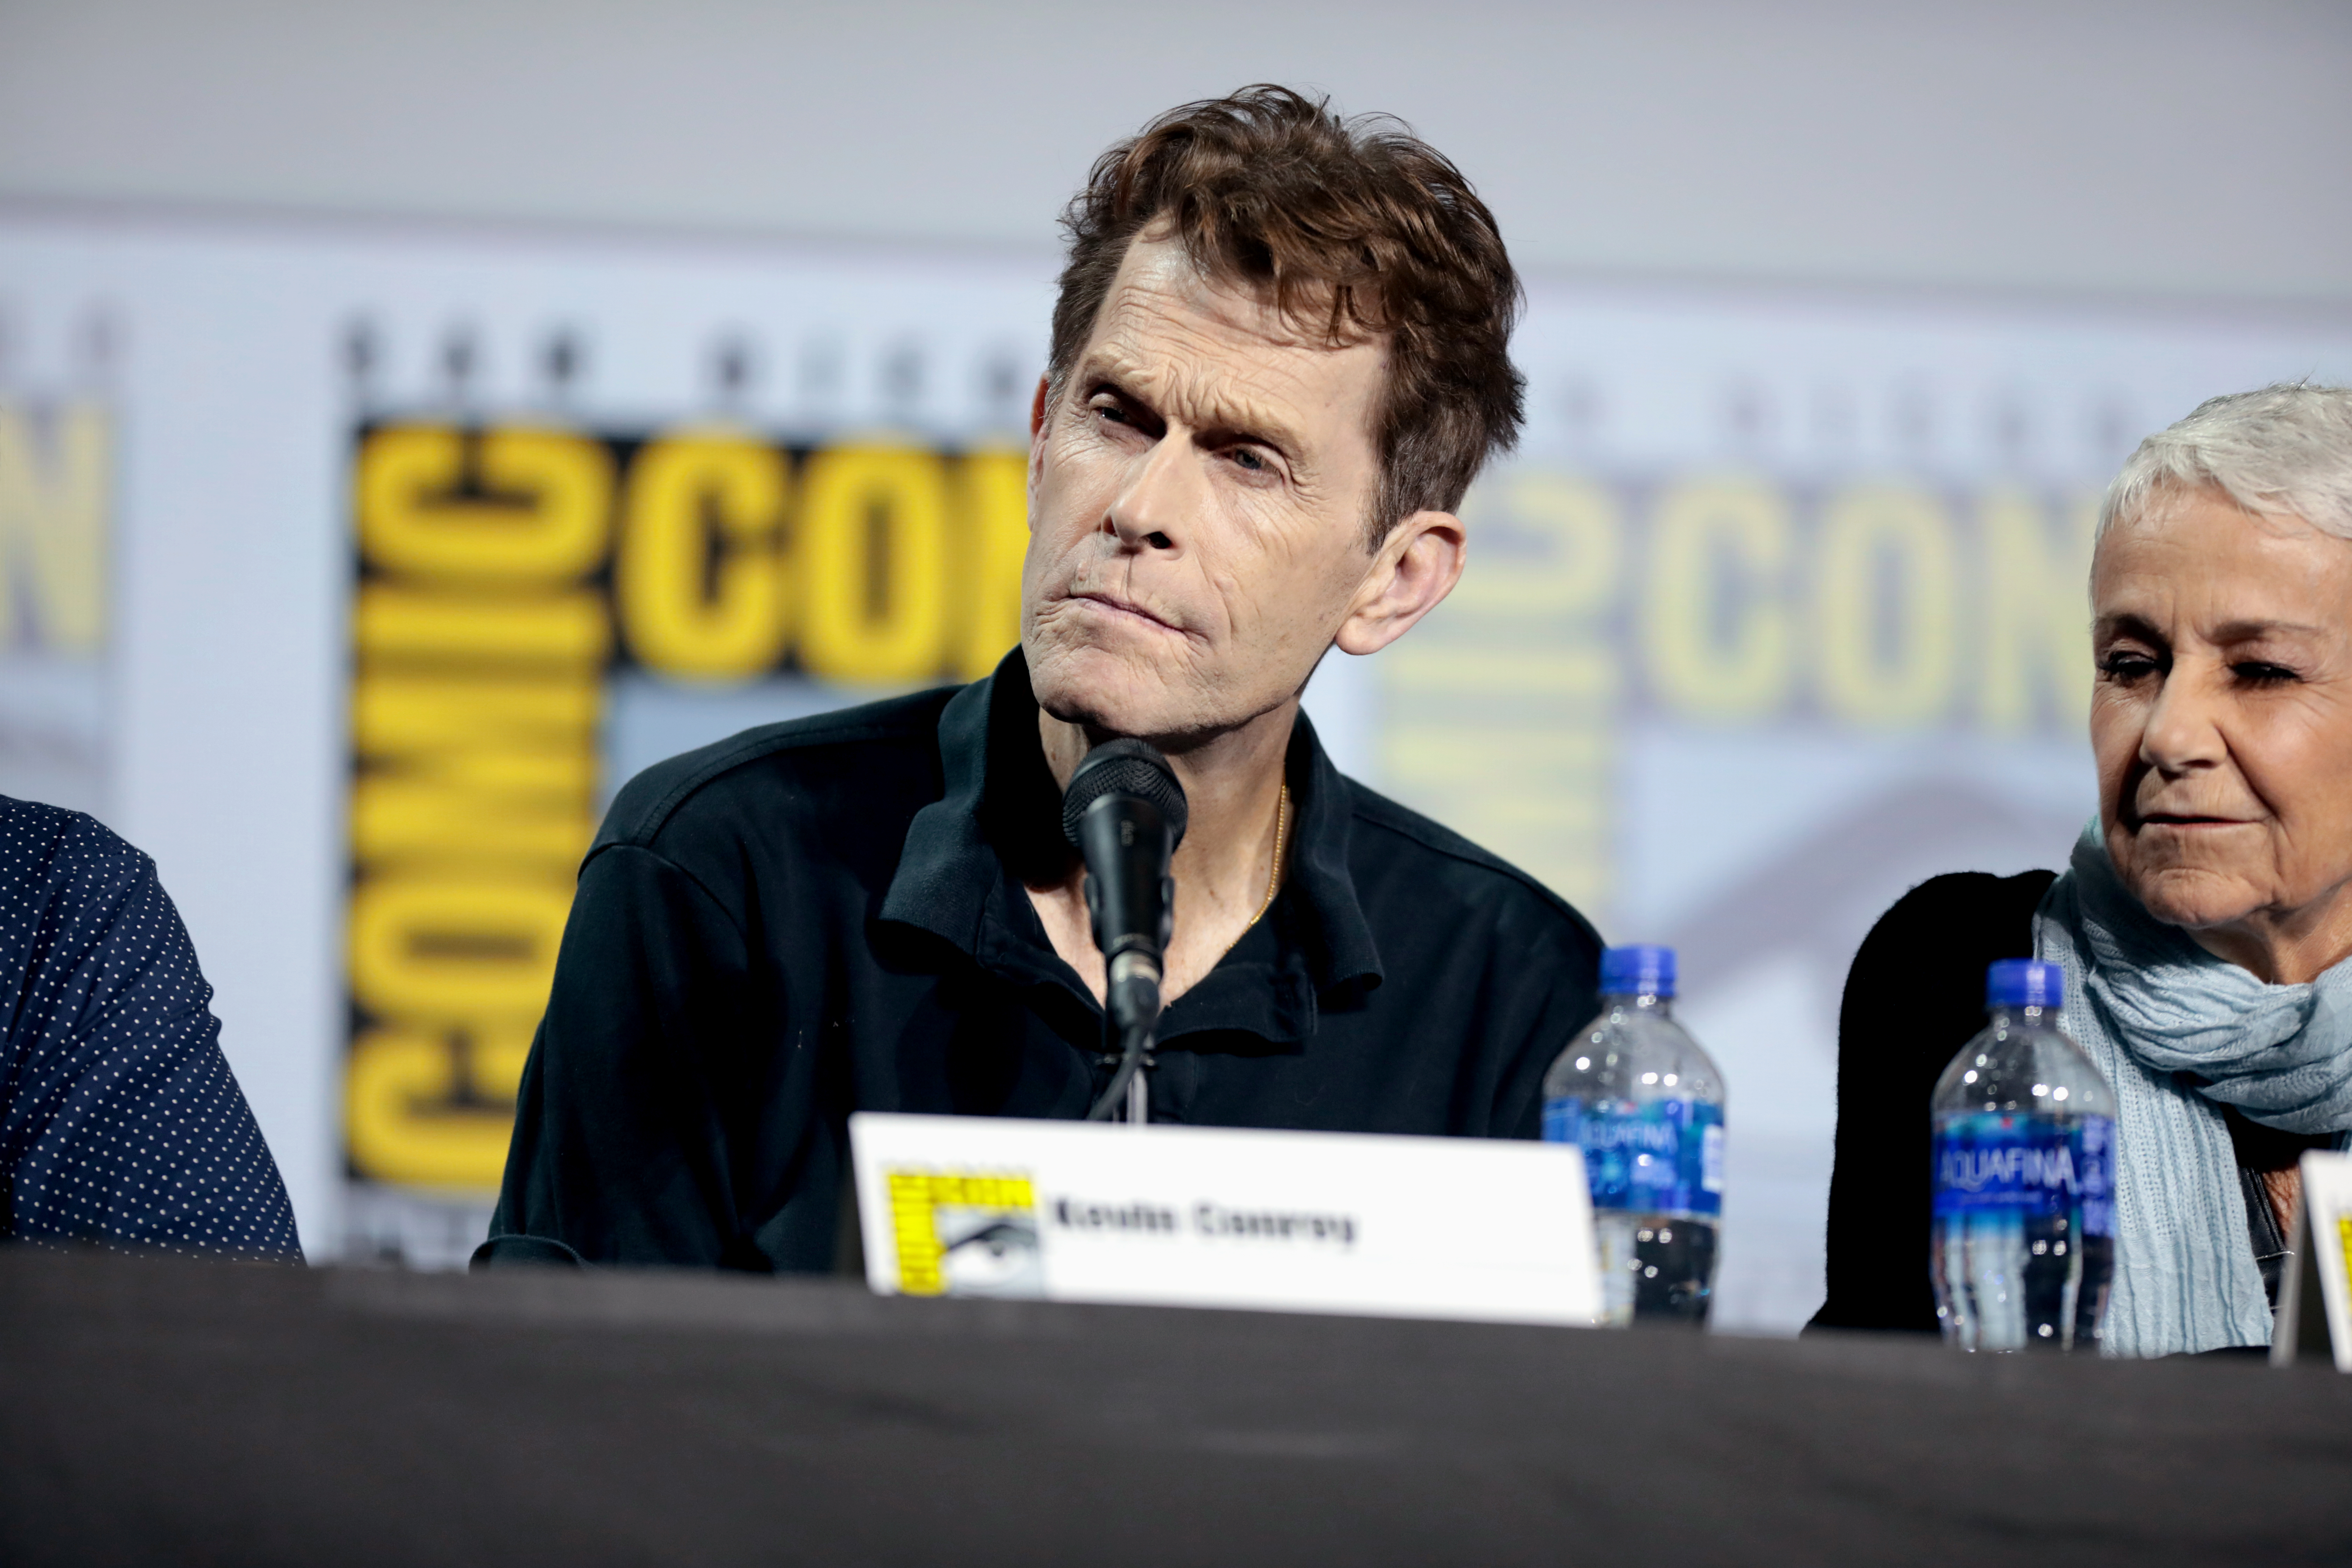 File:Kevin Conroy (48371754441).jpg - Wikimedia Commons